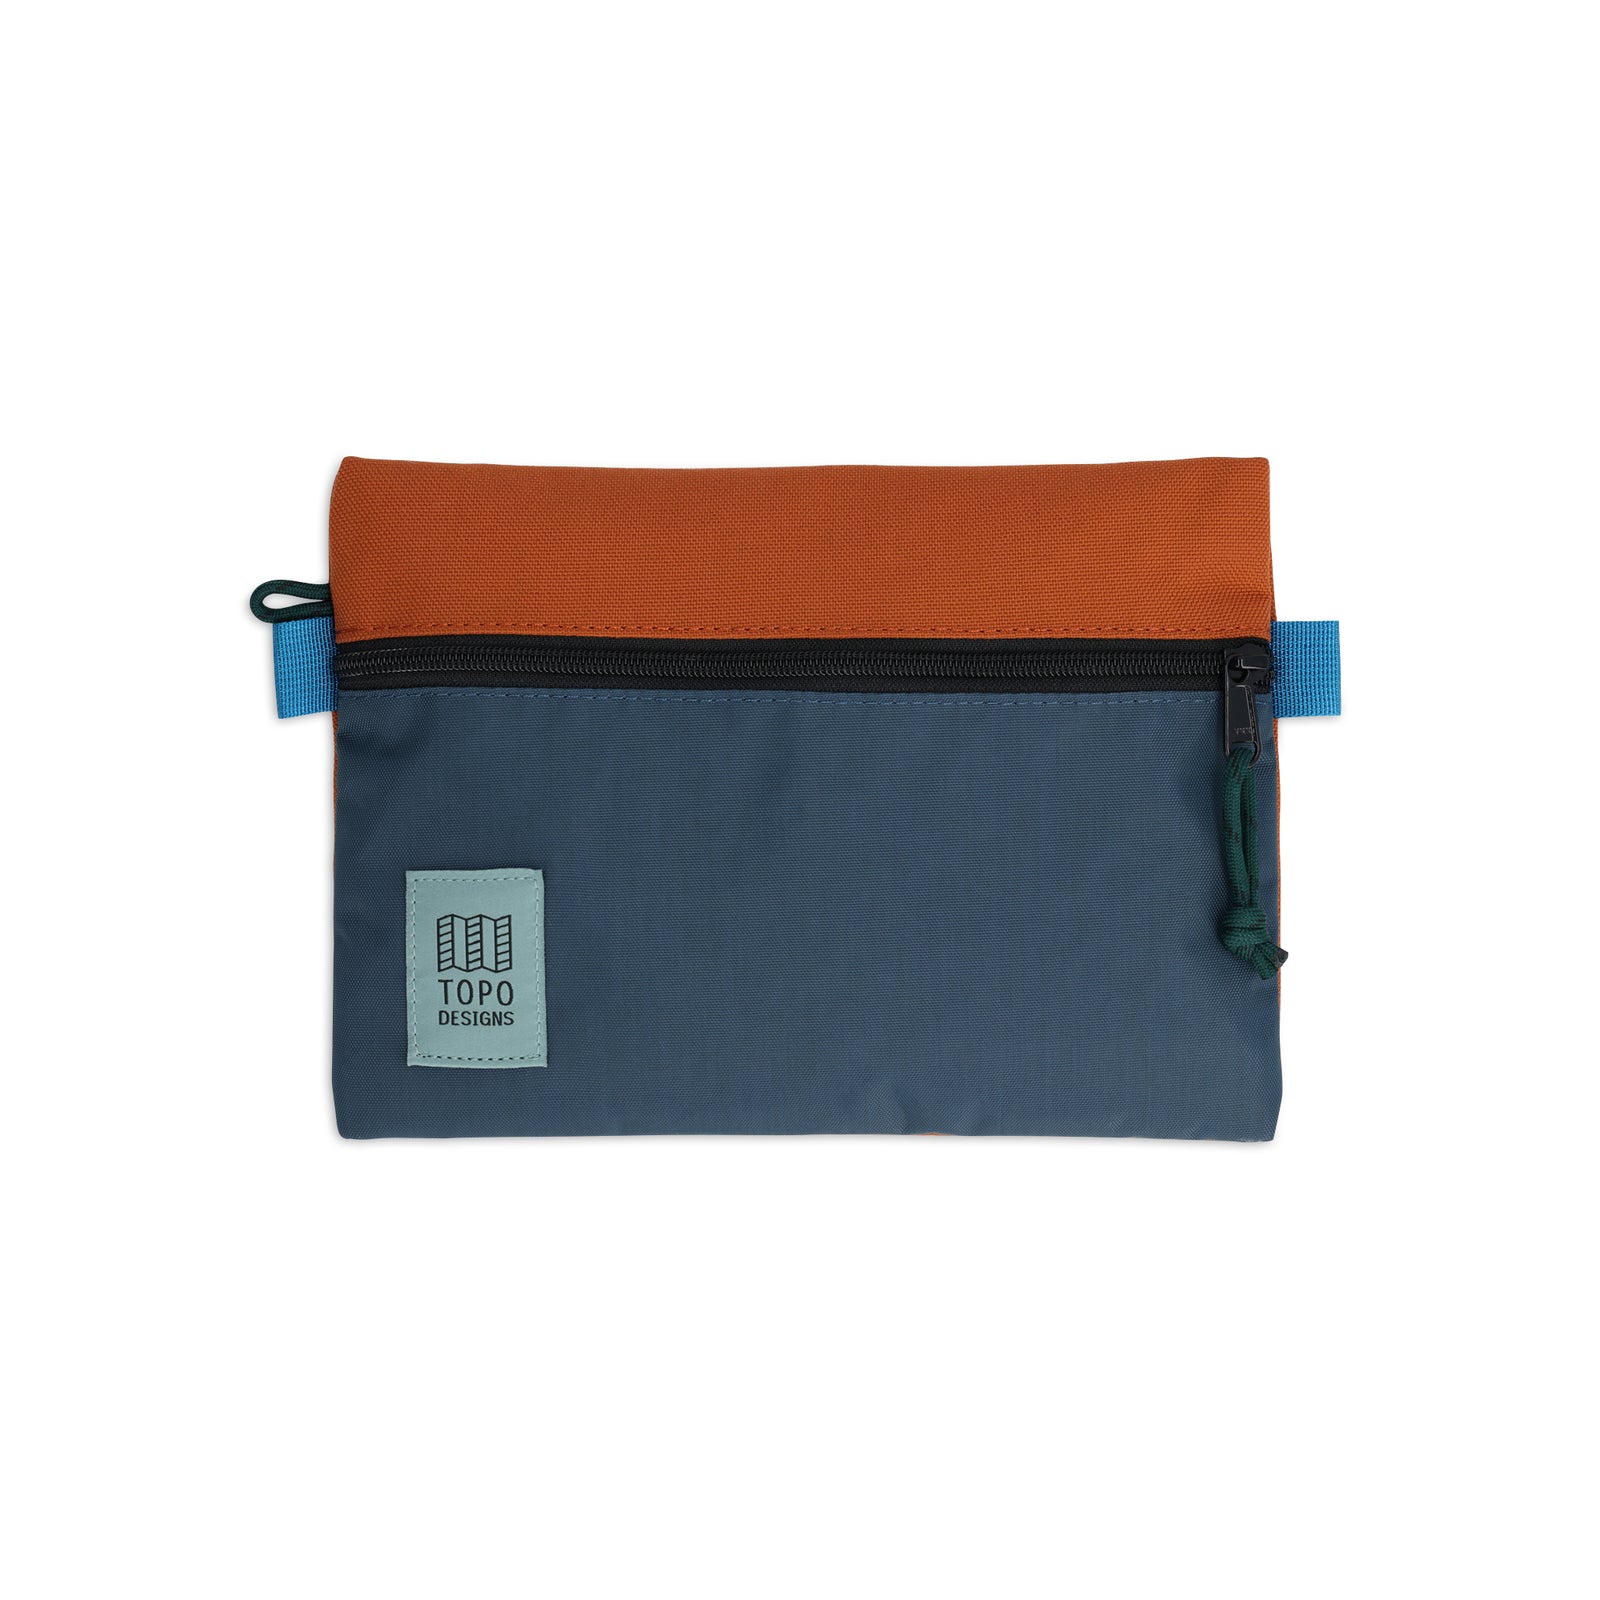 Topo Designs Accessory Bag in "Medium" "Clay / Pond Blue - Recycled" 